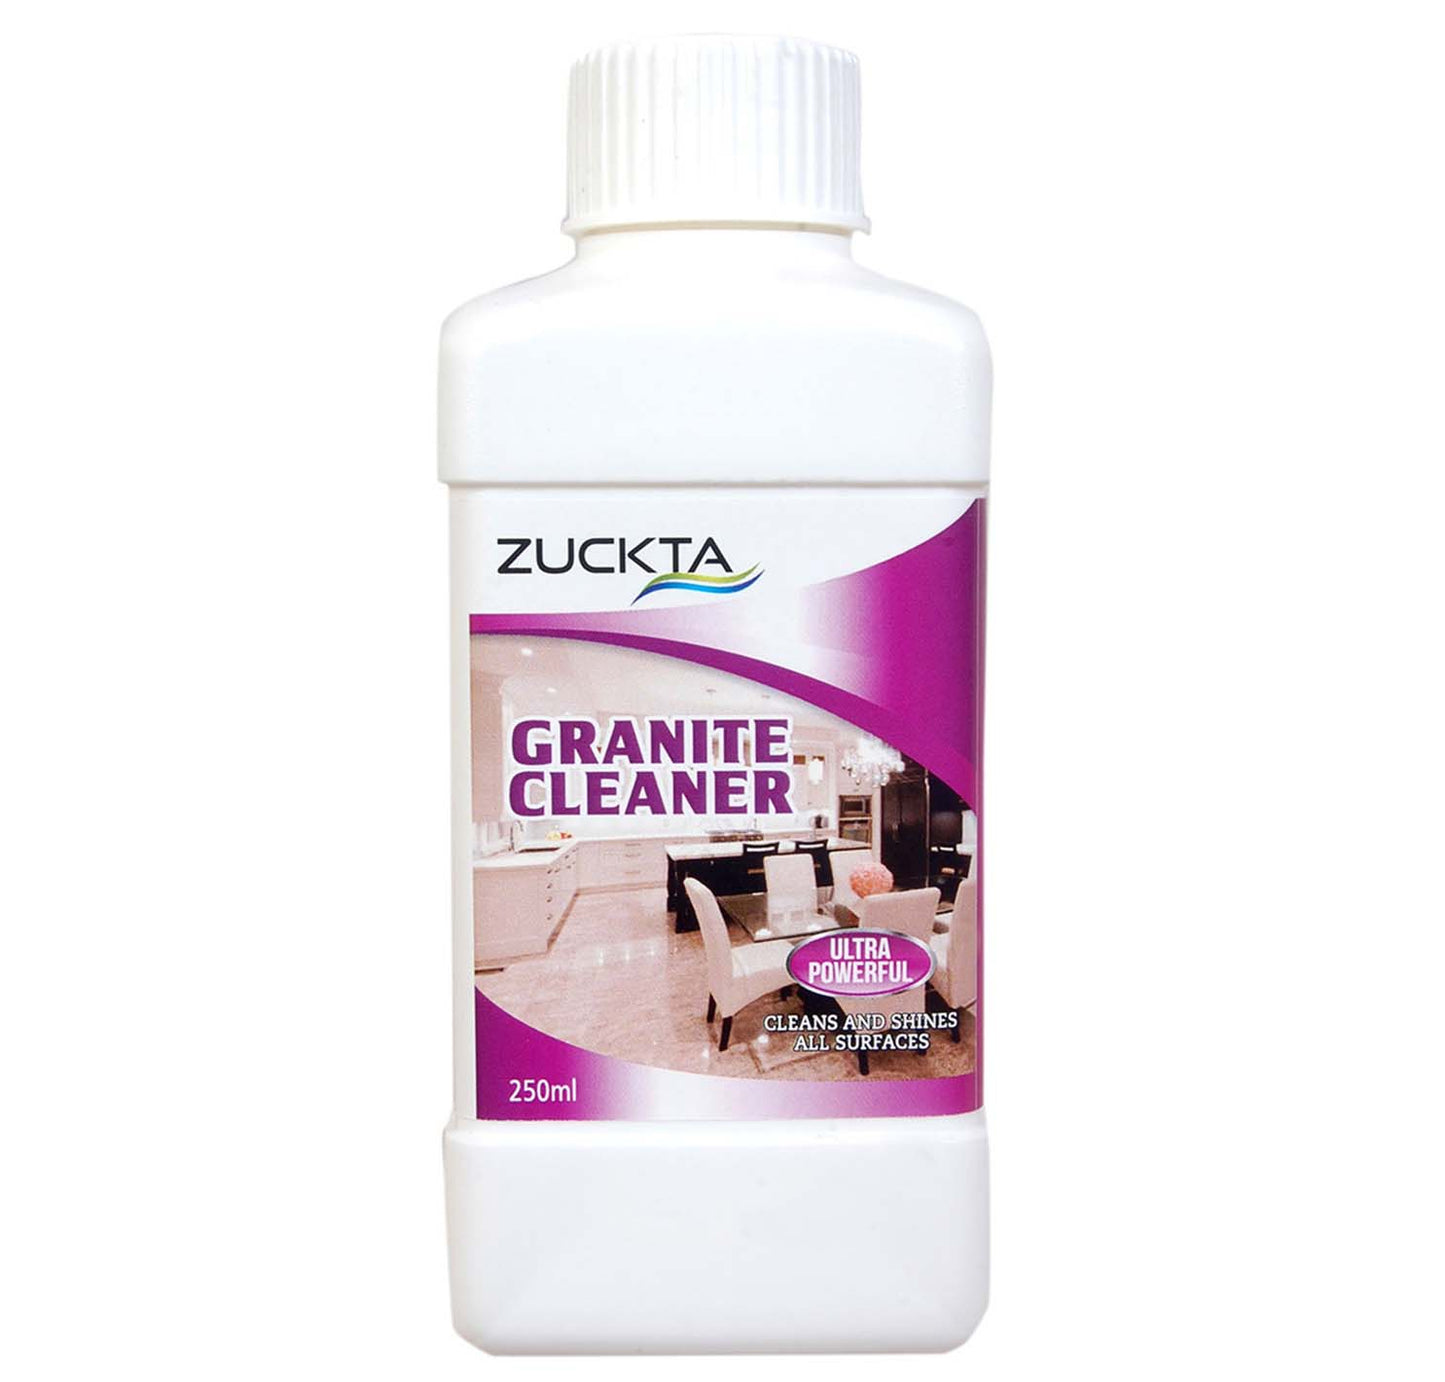 Zuckta Granite Cleaner Ultra Powerful Cleans & Shines All Surface